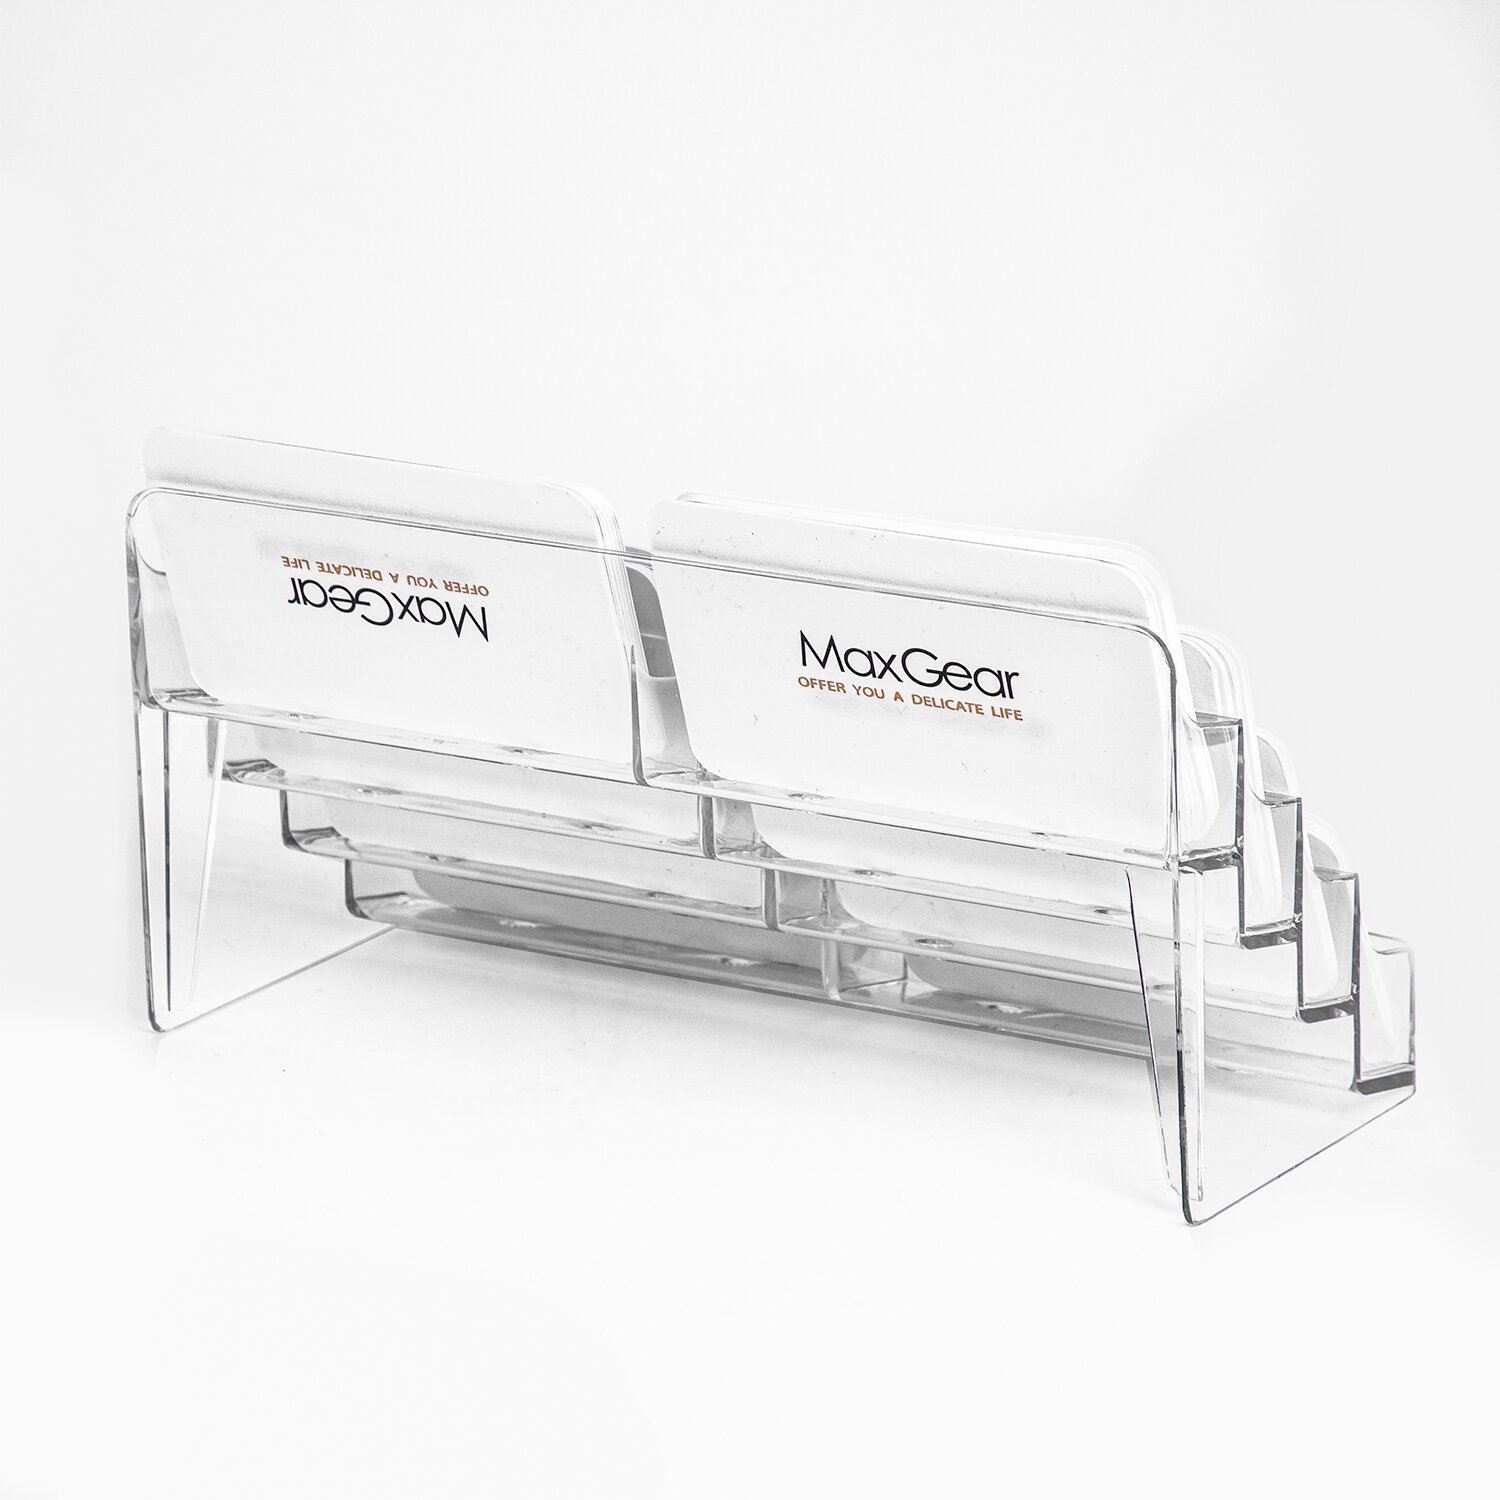 2Pcs Acrylic Business Card Holder 3 Pockets Clear Card Stand Desktop Countertop Organizer Card Filling Display